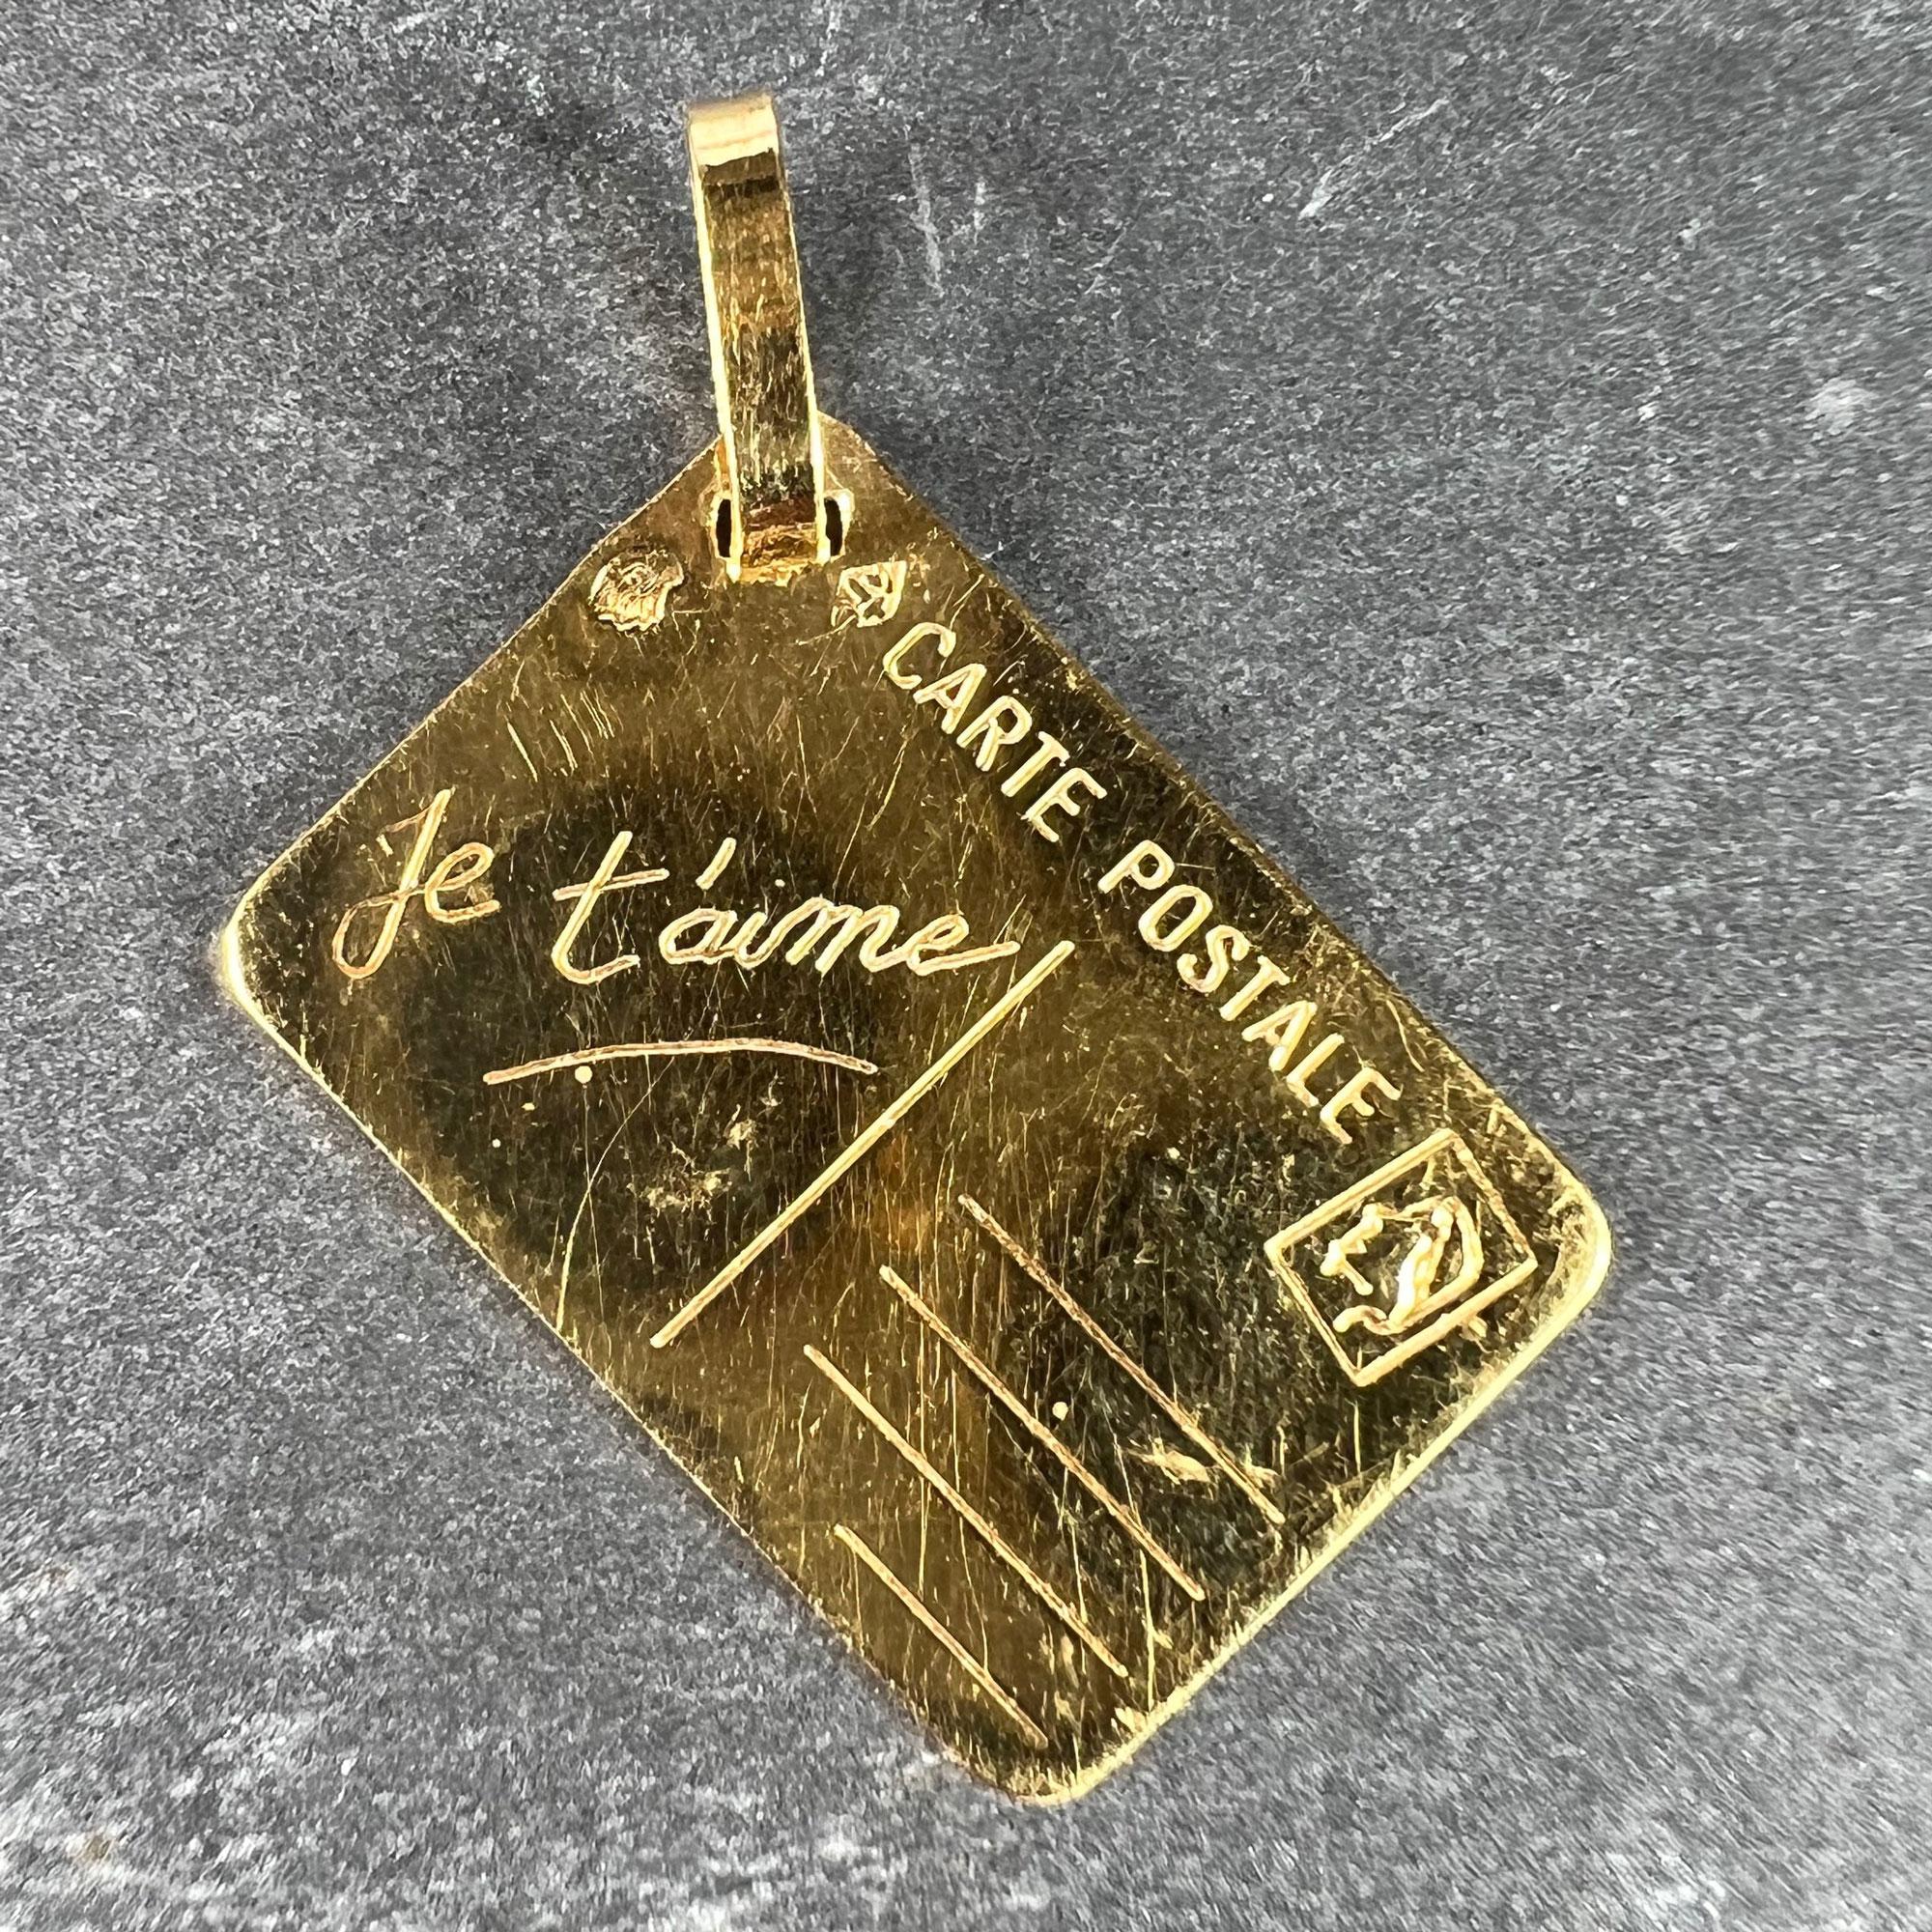 A French 18 karat (18K) yellow gold love letter charm pendant designed as a postcard with blank address field, stamp and the words 'Je t'aime' in cursive to one field.

Stamped with the eagle's head for French manufacture and 18 karat gold and an